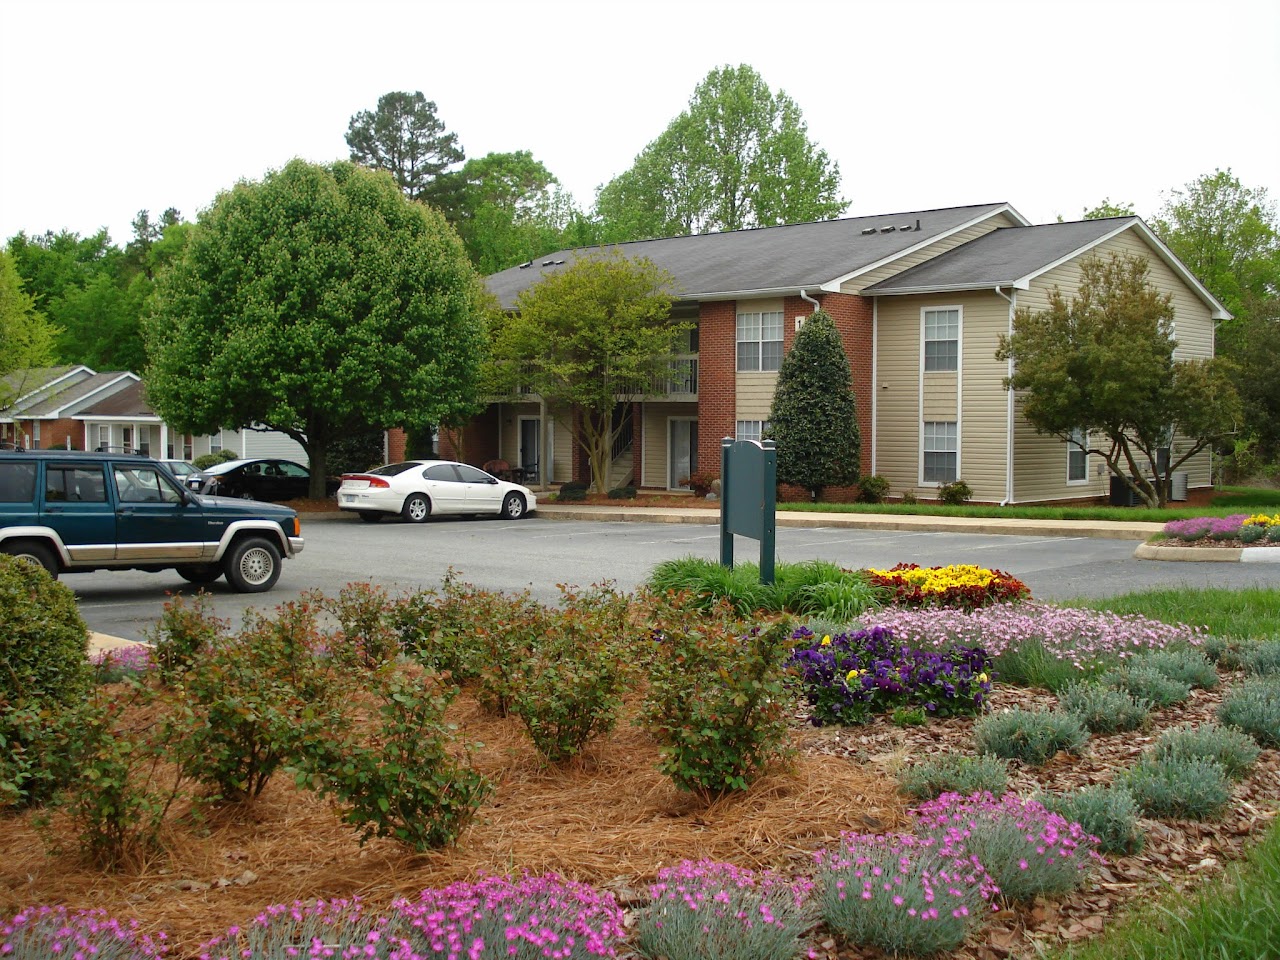 Photo of RIVER POINTE APTS. Affordable housing located at 6 RIVER POINTE DR RANDLEMAN, NC 27317